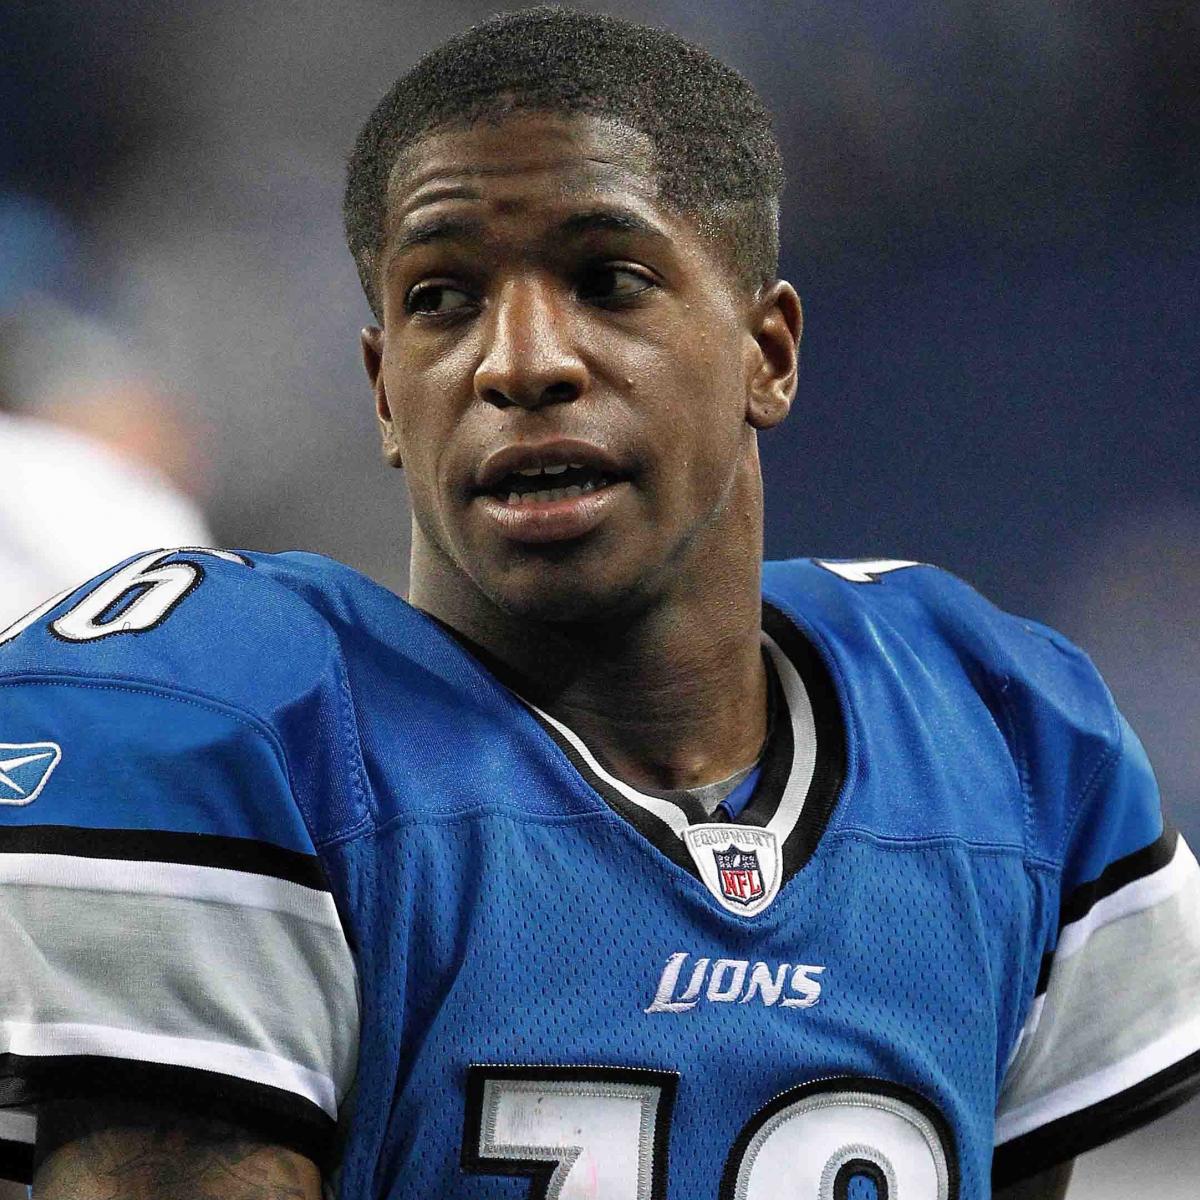 Timeline of Titus Young's Historic Downfall from Detroit Lions and NFL